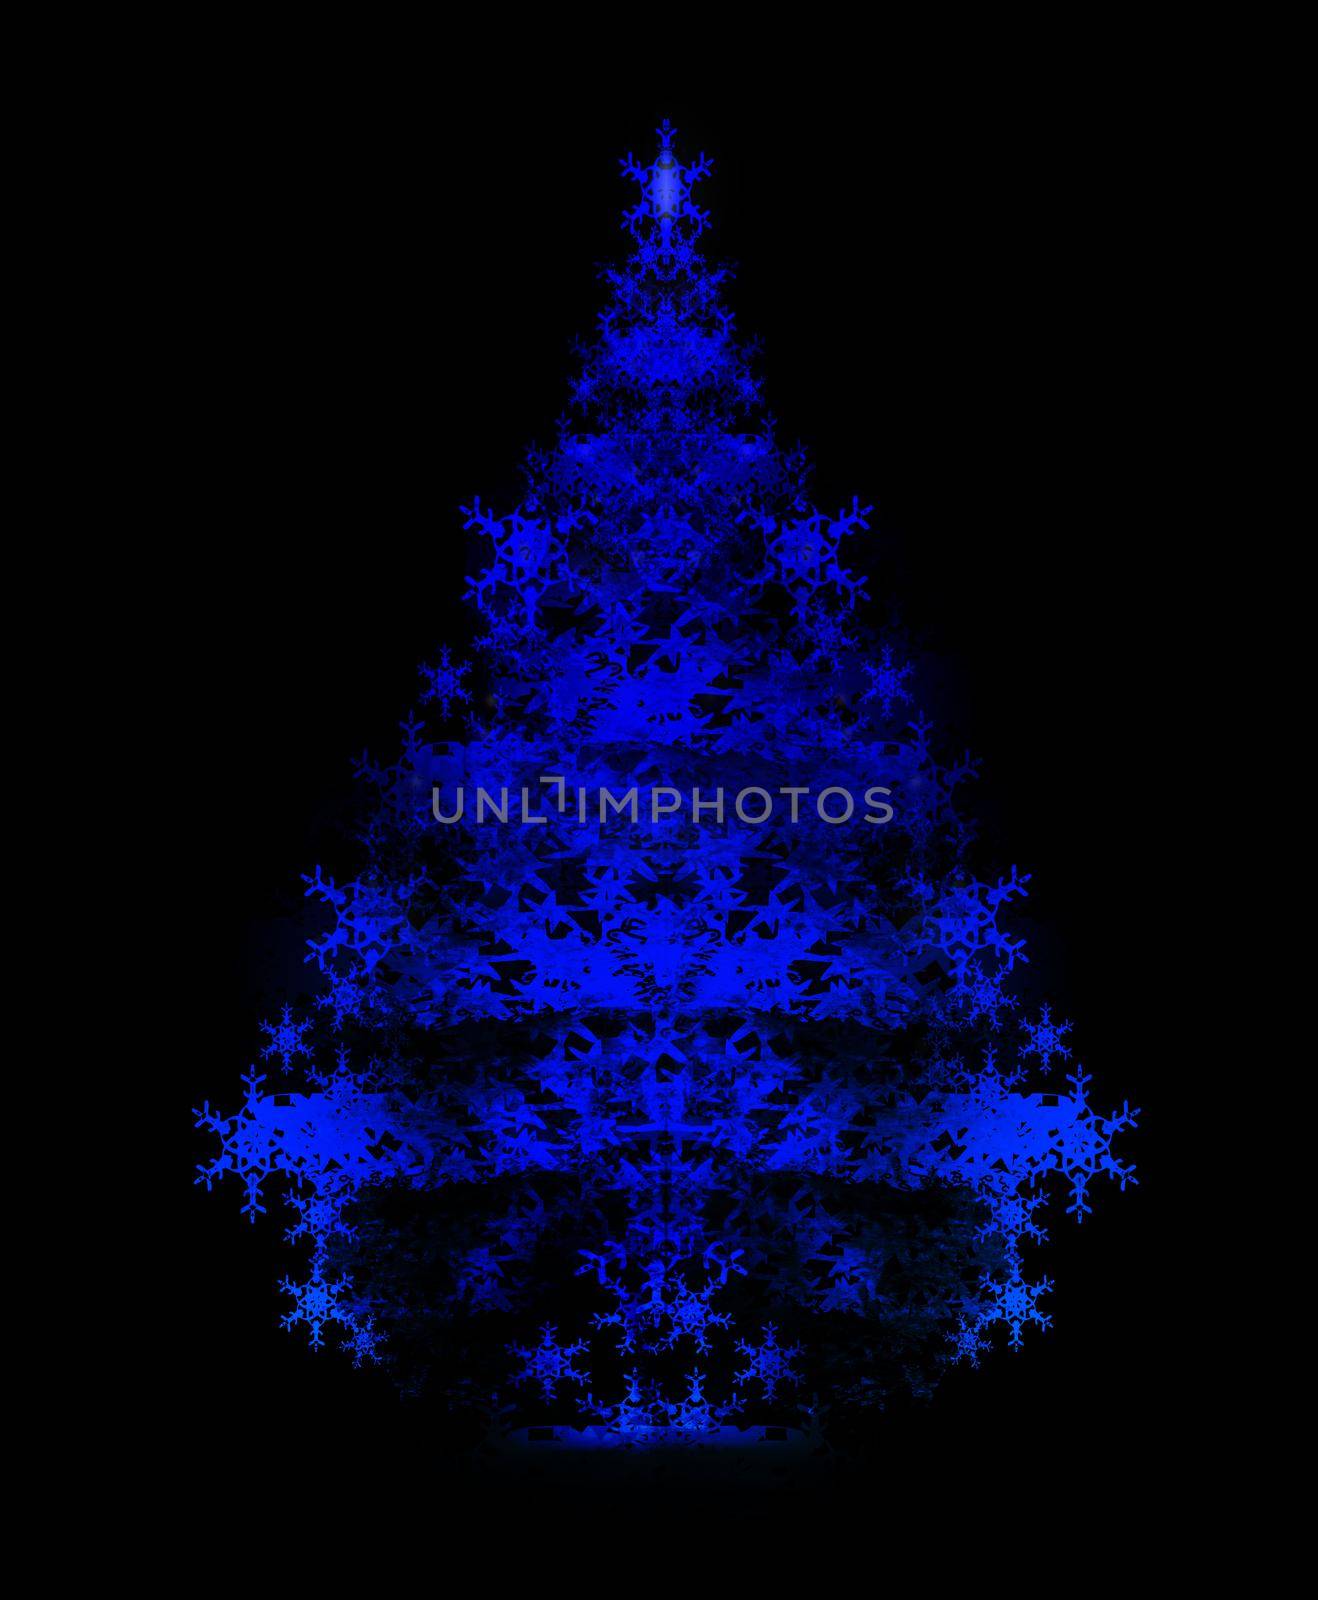 Modern style Christmas tree background by JackyBrown